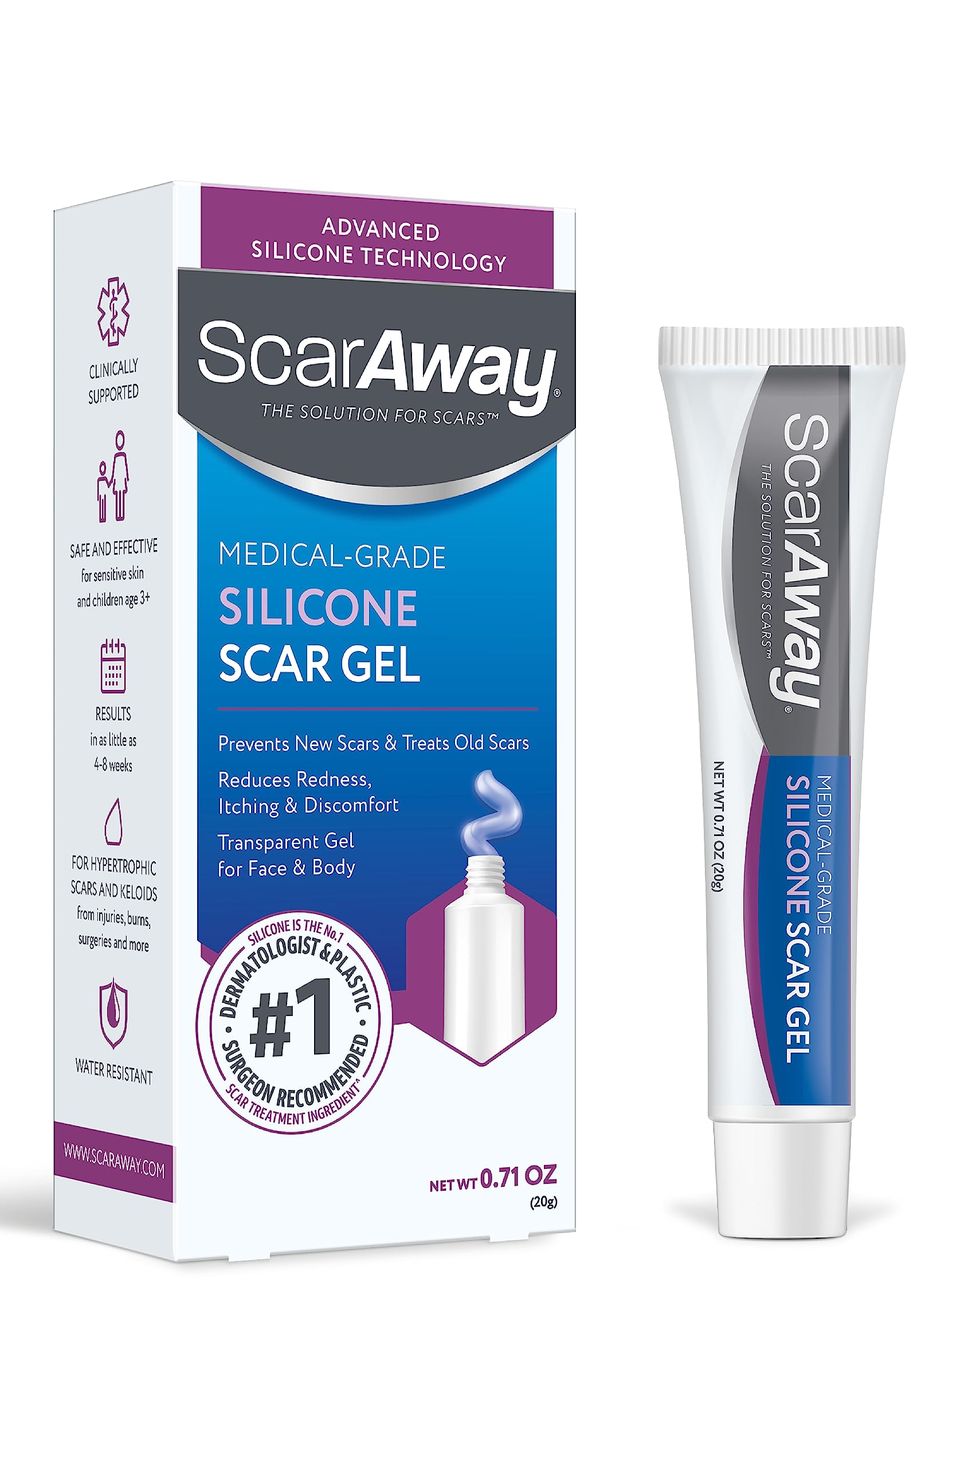 What Makes Silicone Gel Good for Scar Treatment?